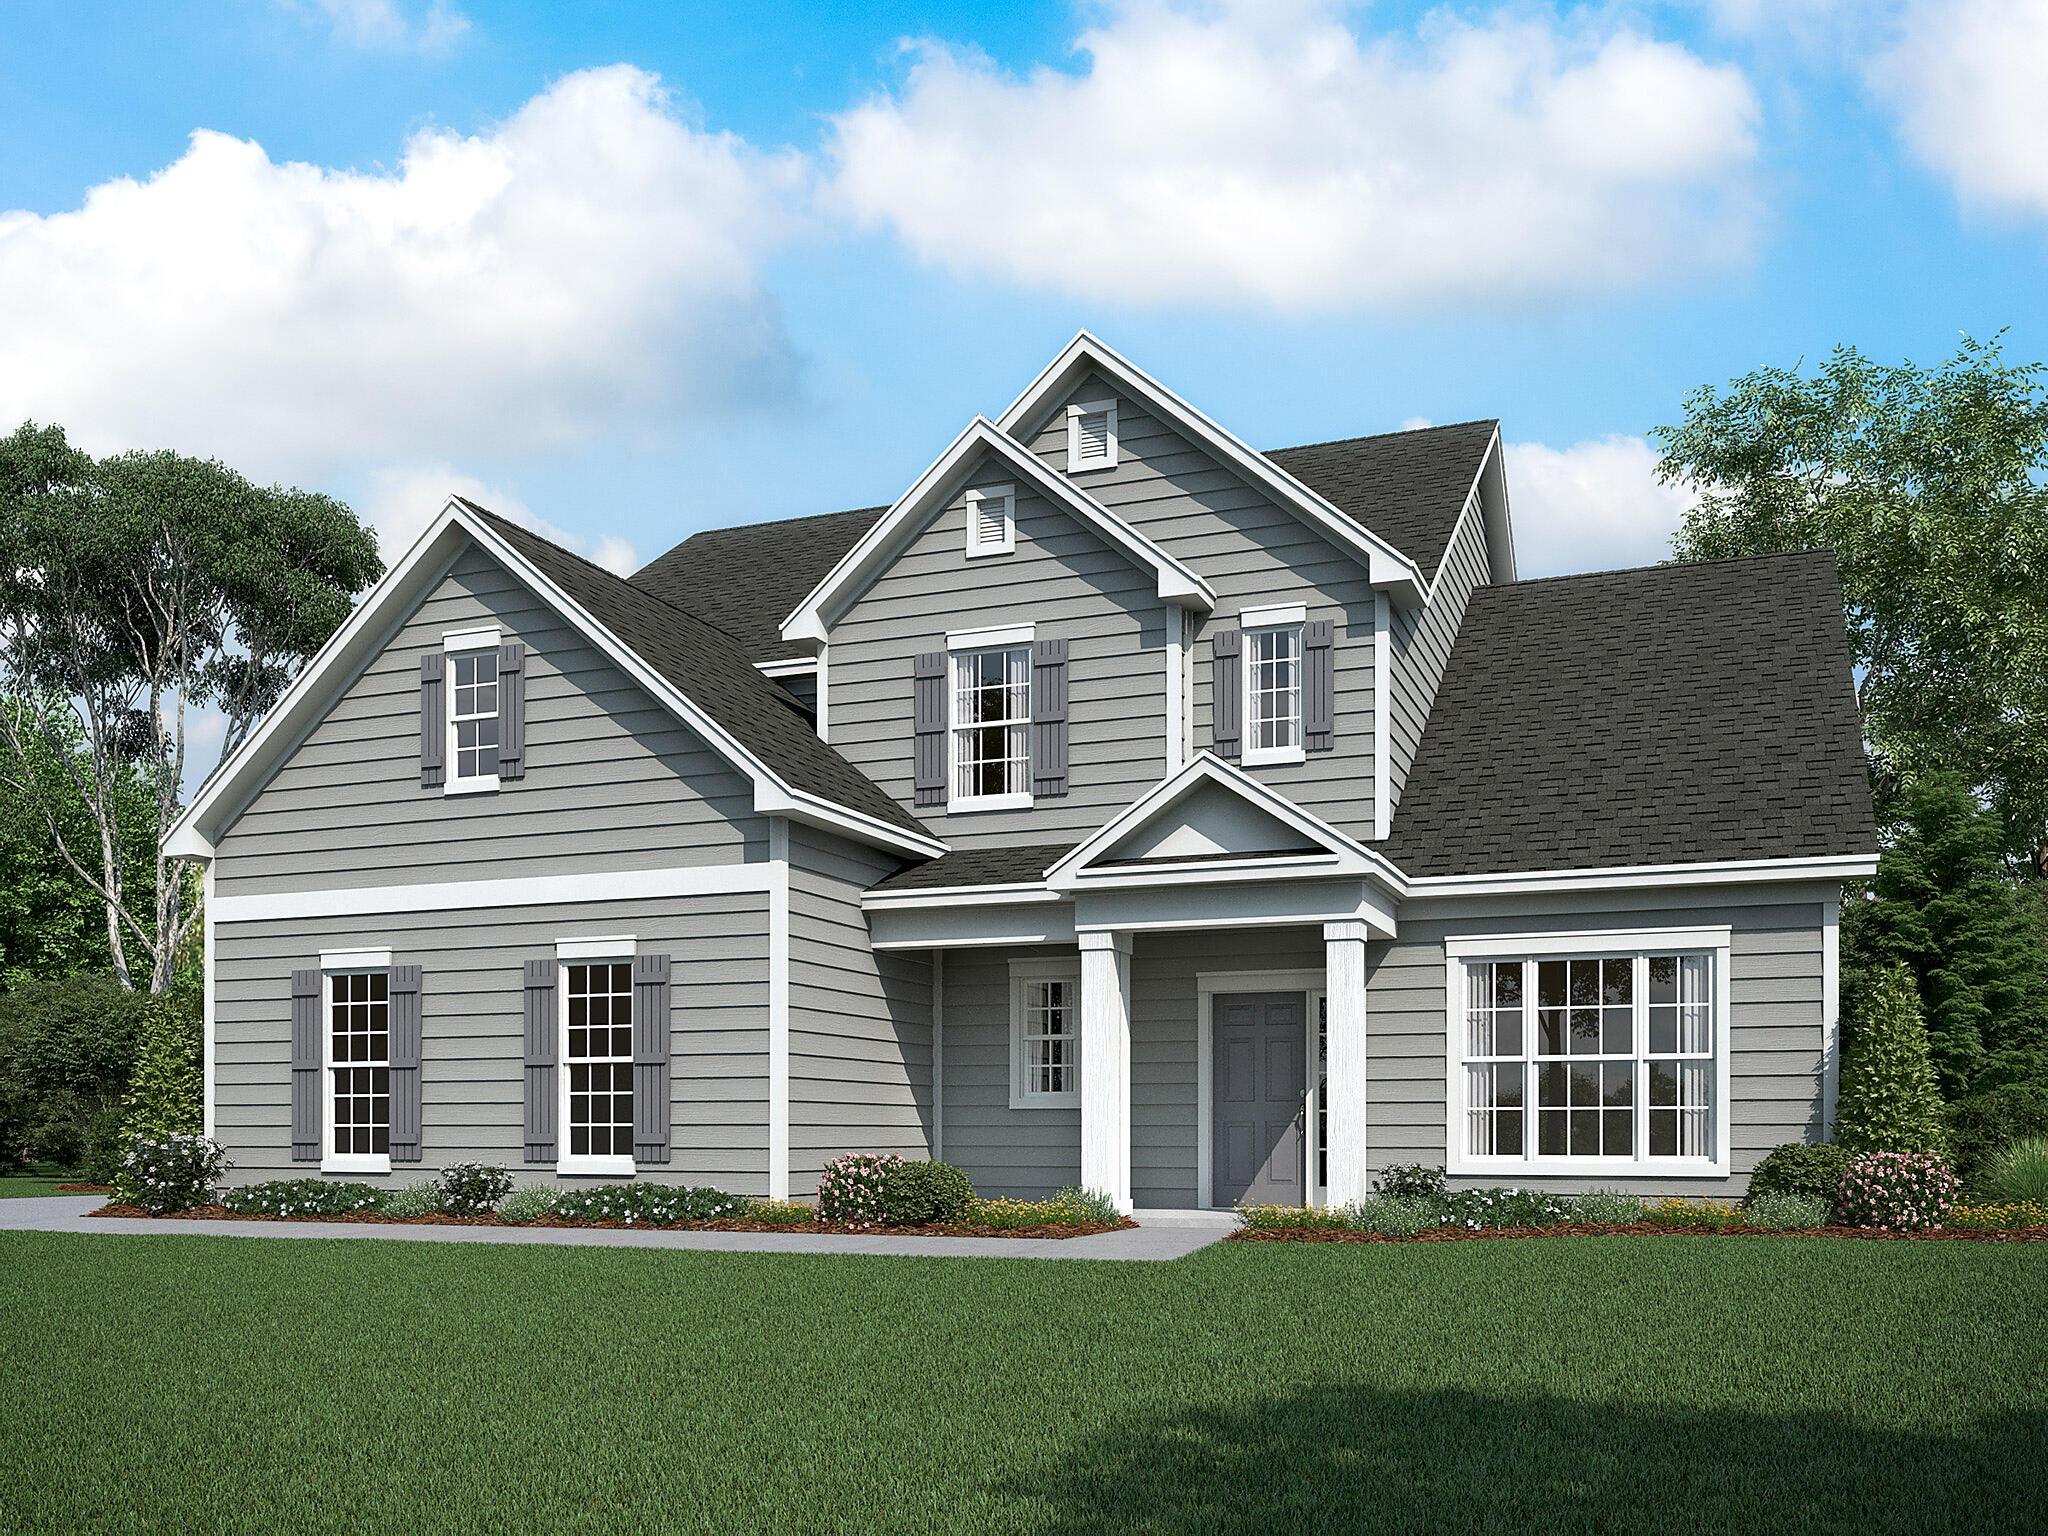 Camden Plan at River Reserve in Greer, SC by Empire Communities